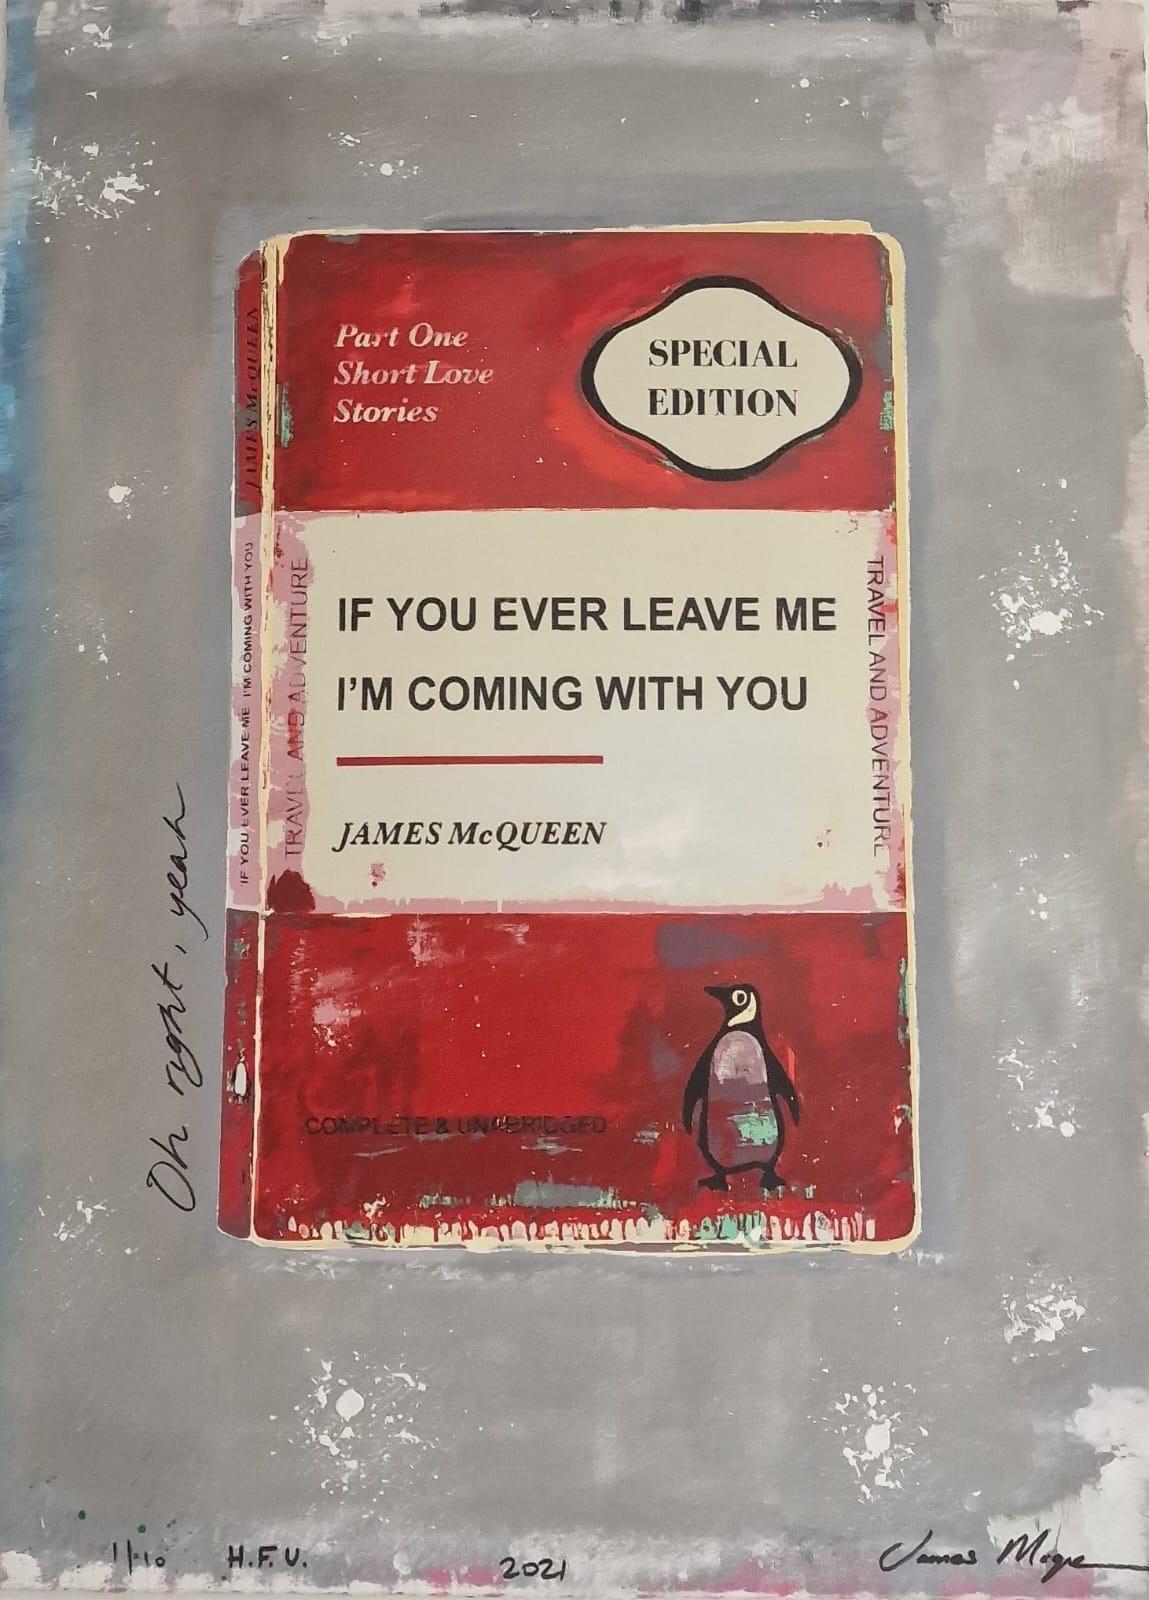 If You Ever Leave Me I'm Coming With You - Mixed Media Art by James McQueen